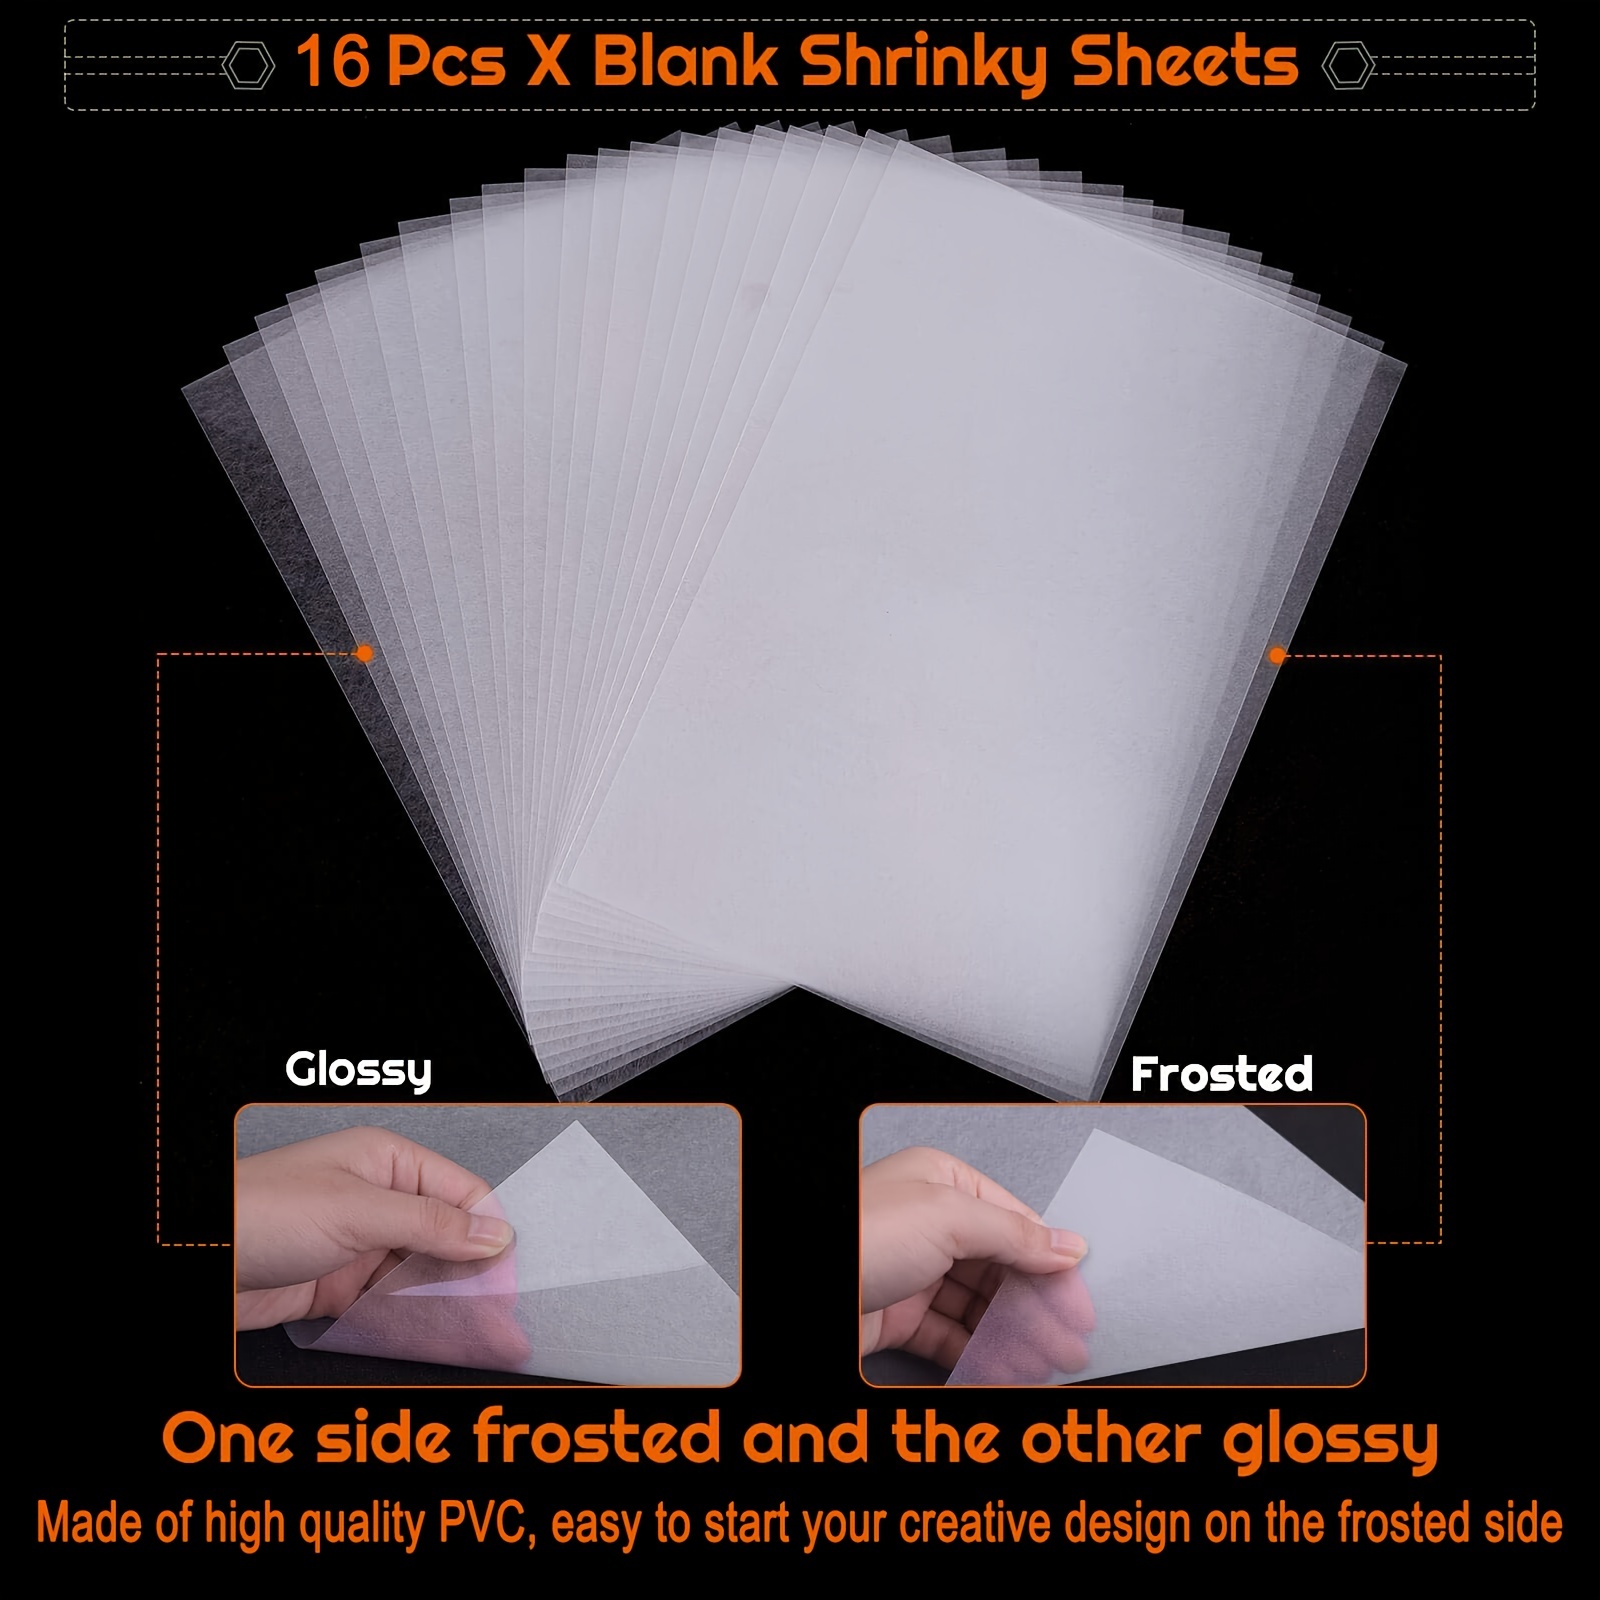 Rdanruy 150PCS Shrink Plastic Sheets Kit Include 50PCS Shrink Paper Sheets  Shrink Art Paper Shrink Film Sheets with 100PCS Keychains Accessories for